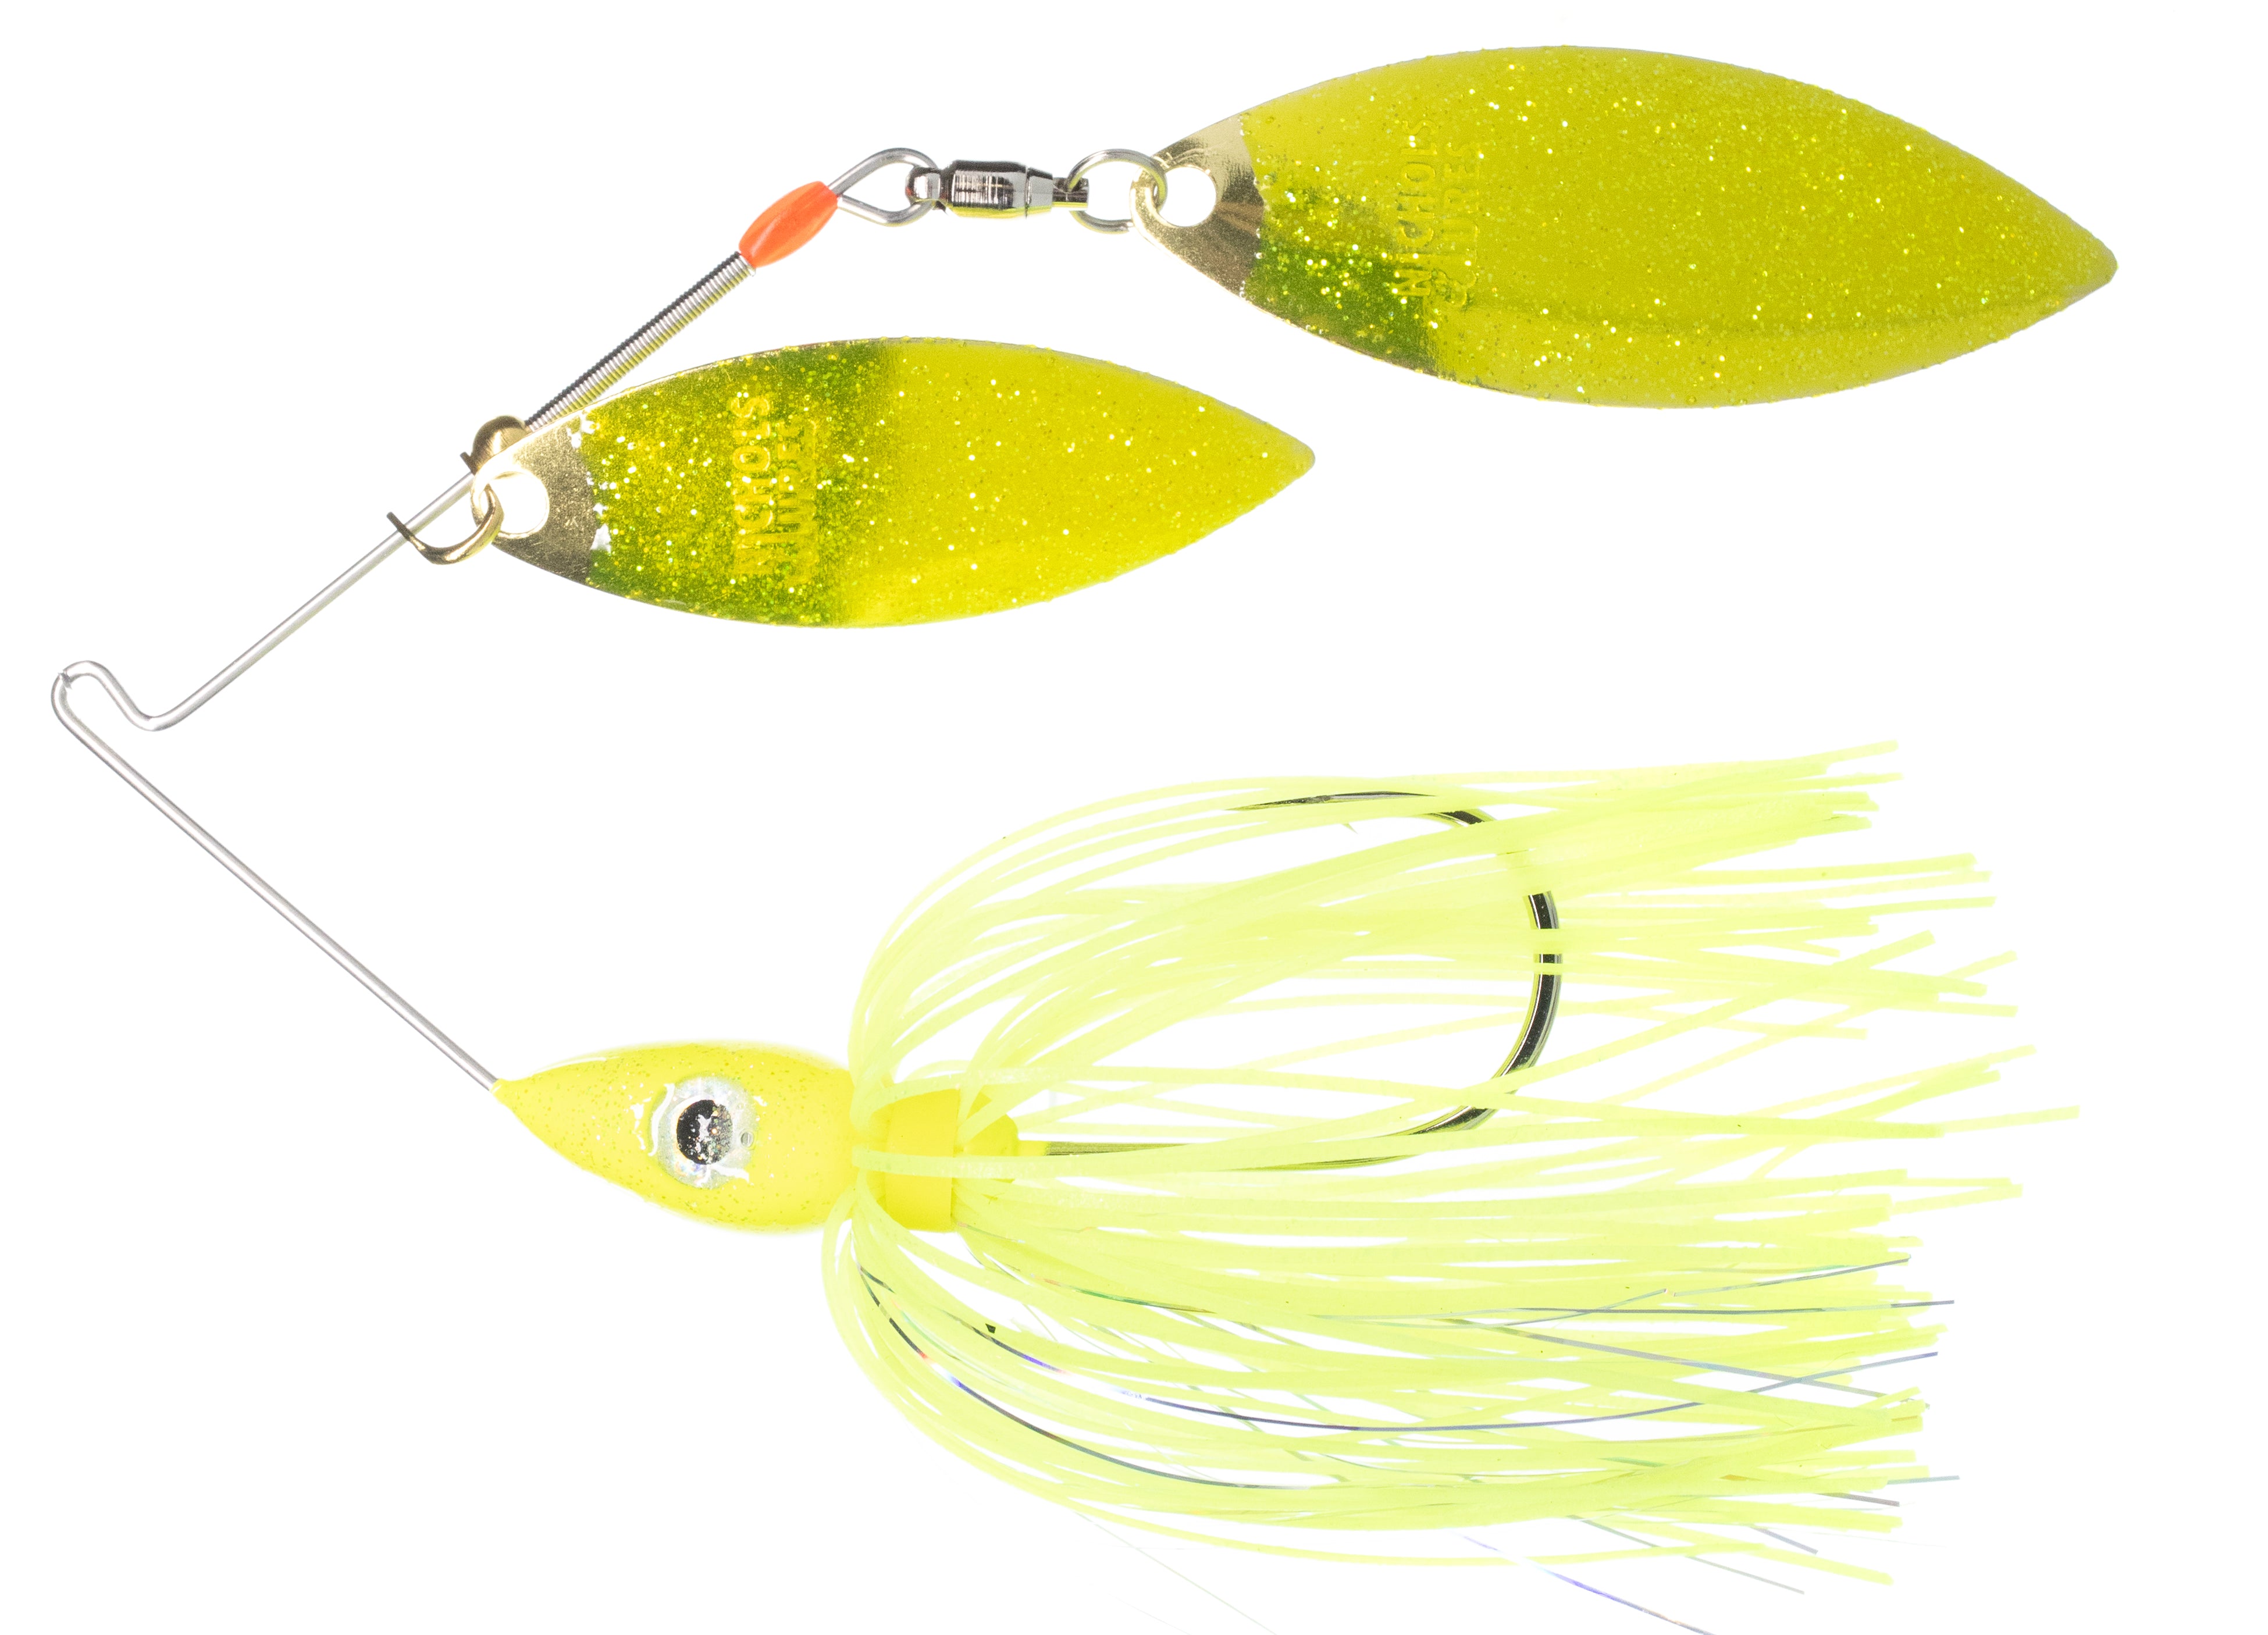 Nichols Lures SG1567-12 Pulsator Shattered Glass Spinnerbait, 1/2oz, Green Crystal Silver